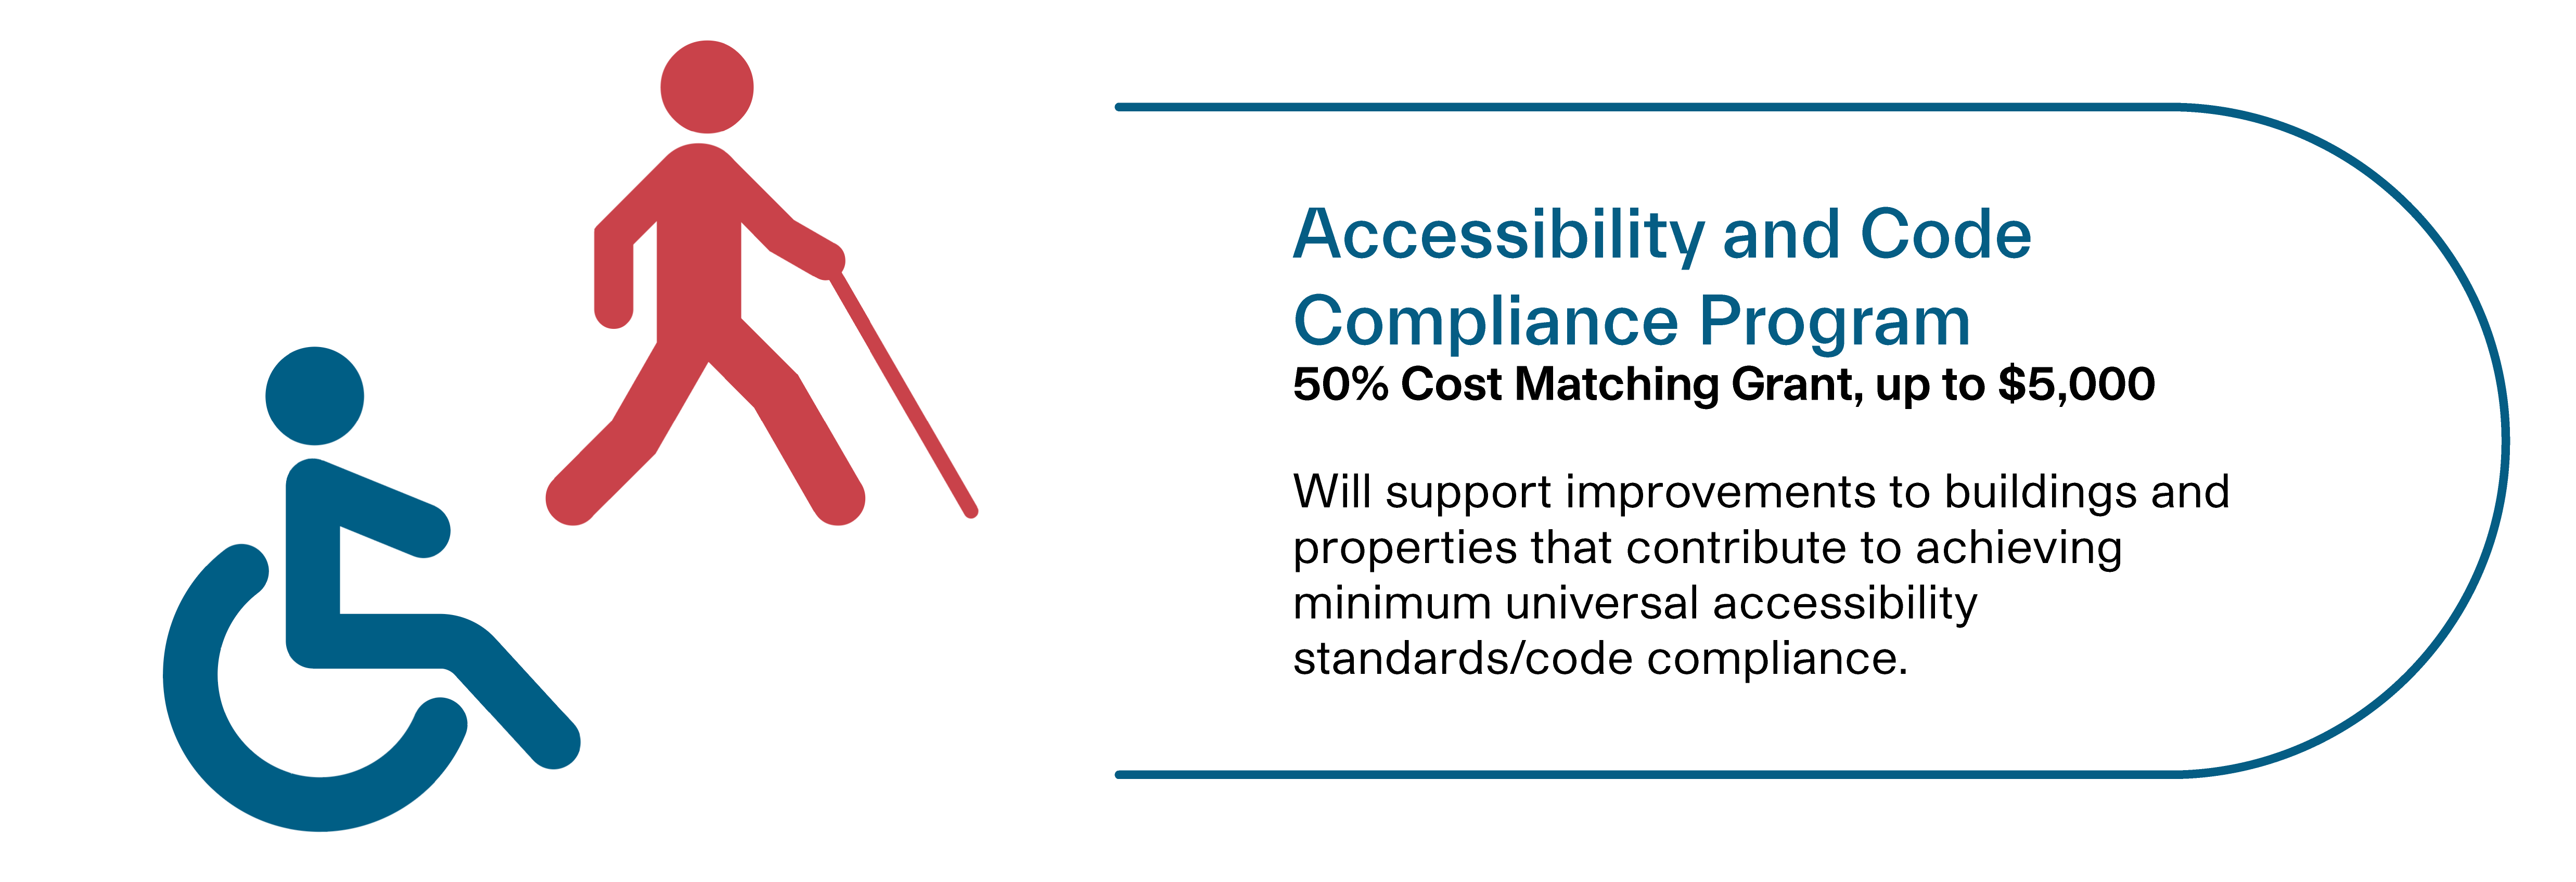 accessibility and code compliance program